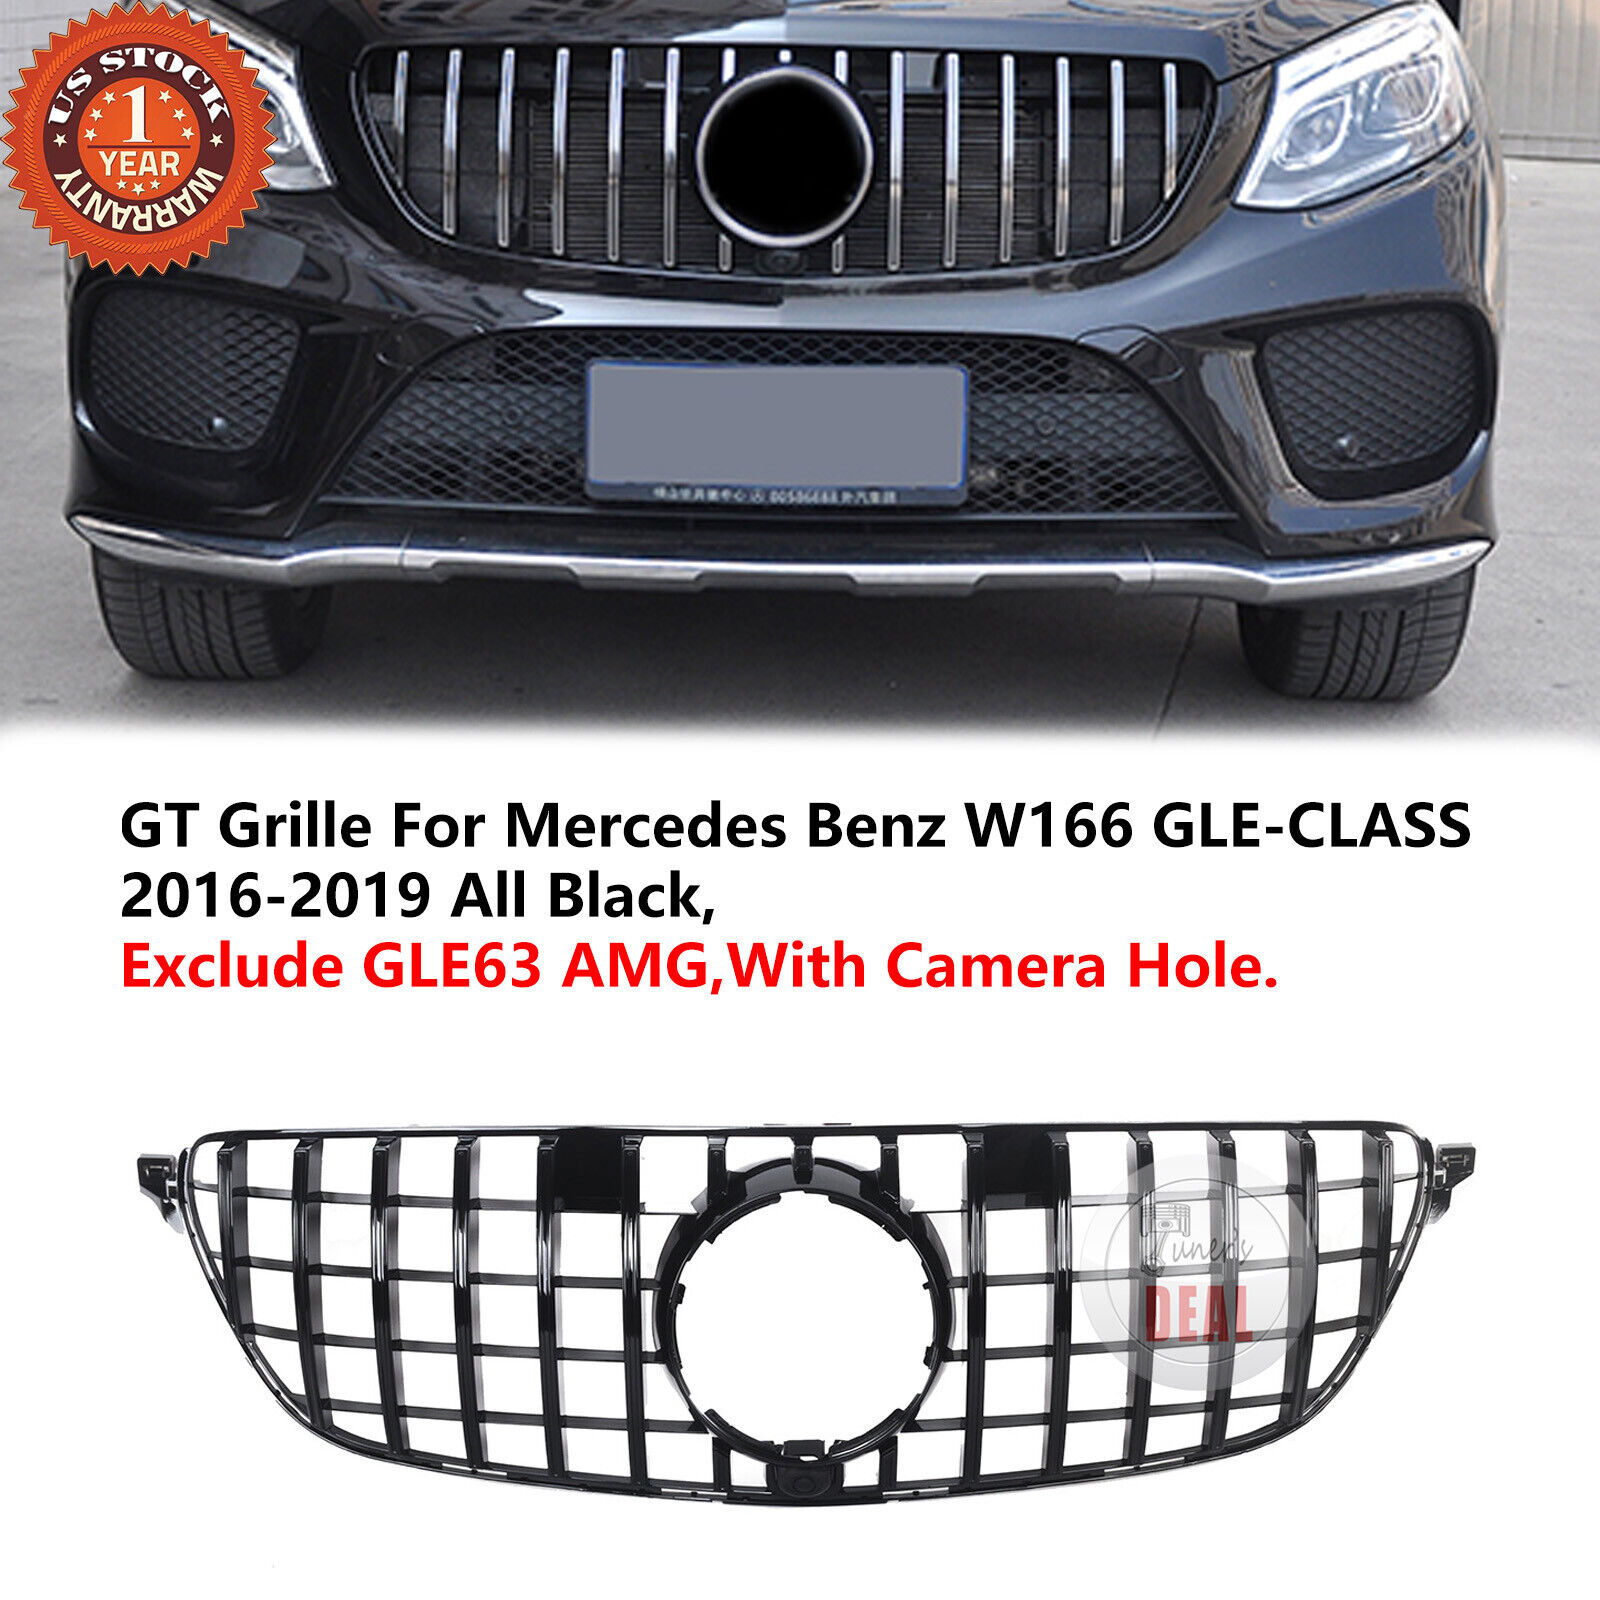 AMG GT Grille Grill Black For Mercedes Benz W166 2016-2019 GLE350 GLE400 GLE43